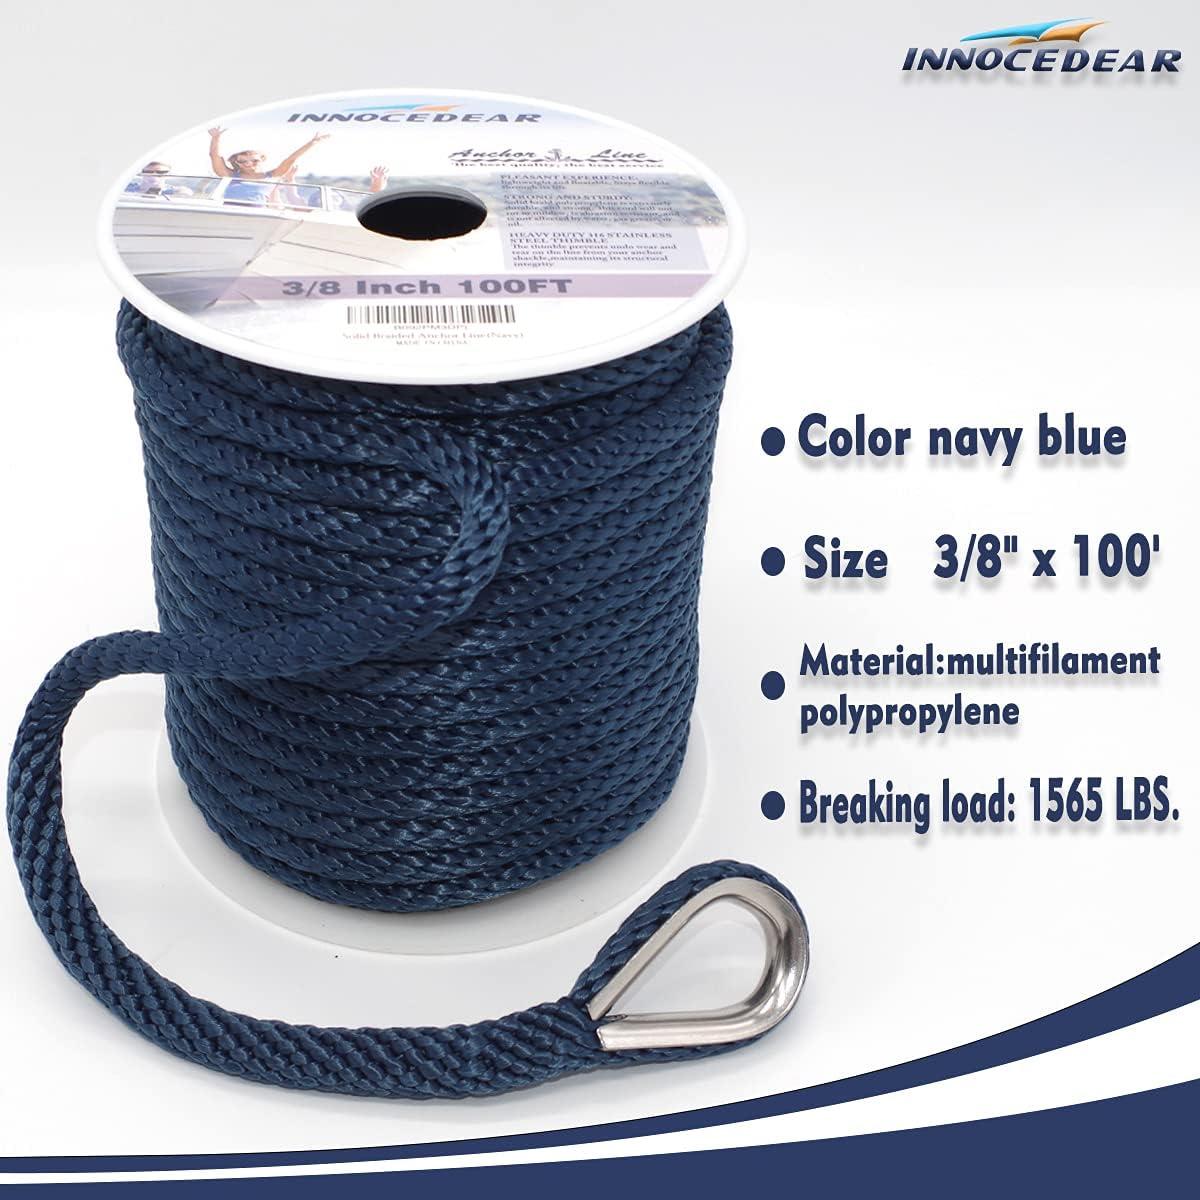  Premium Anchor Rope 100 ft x 3/8 inch, Solid Braid MFP